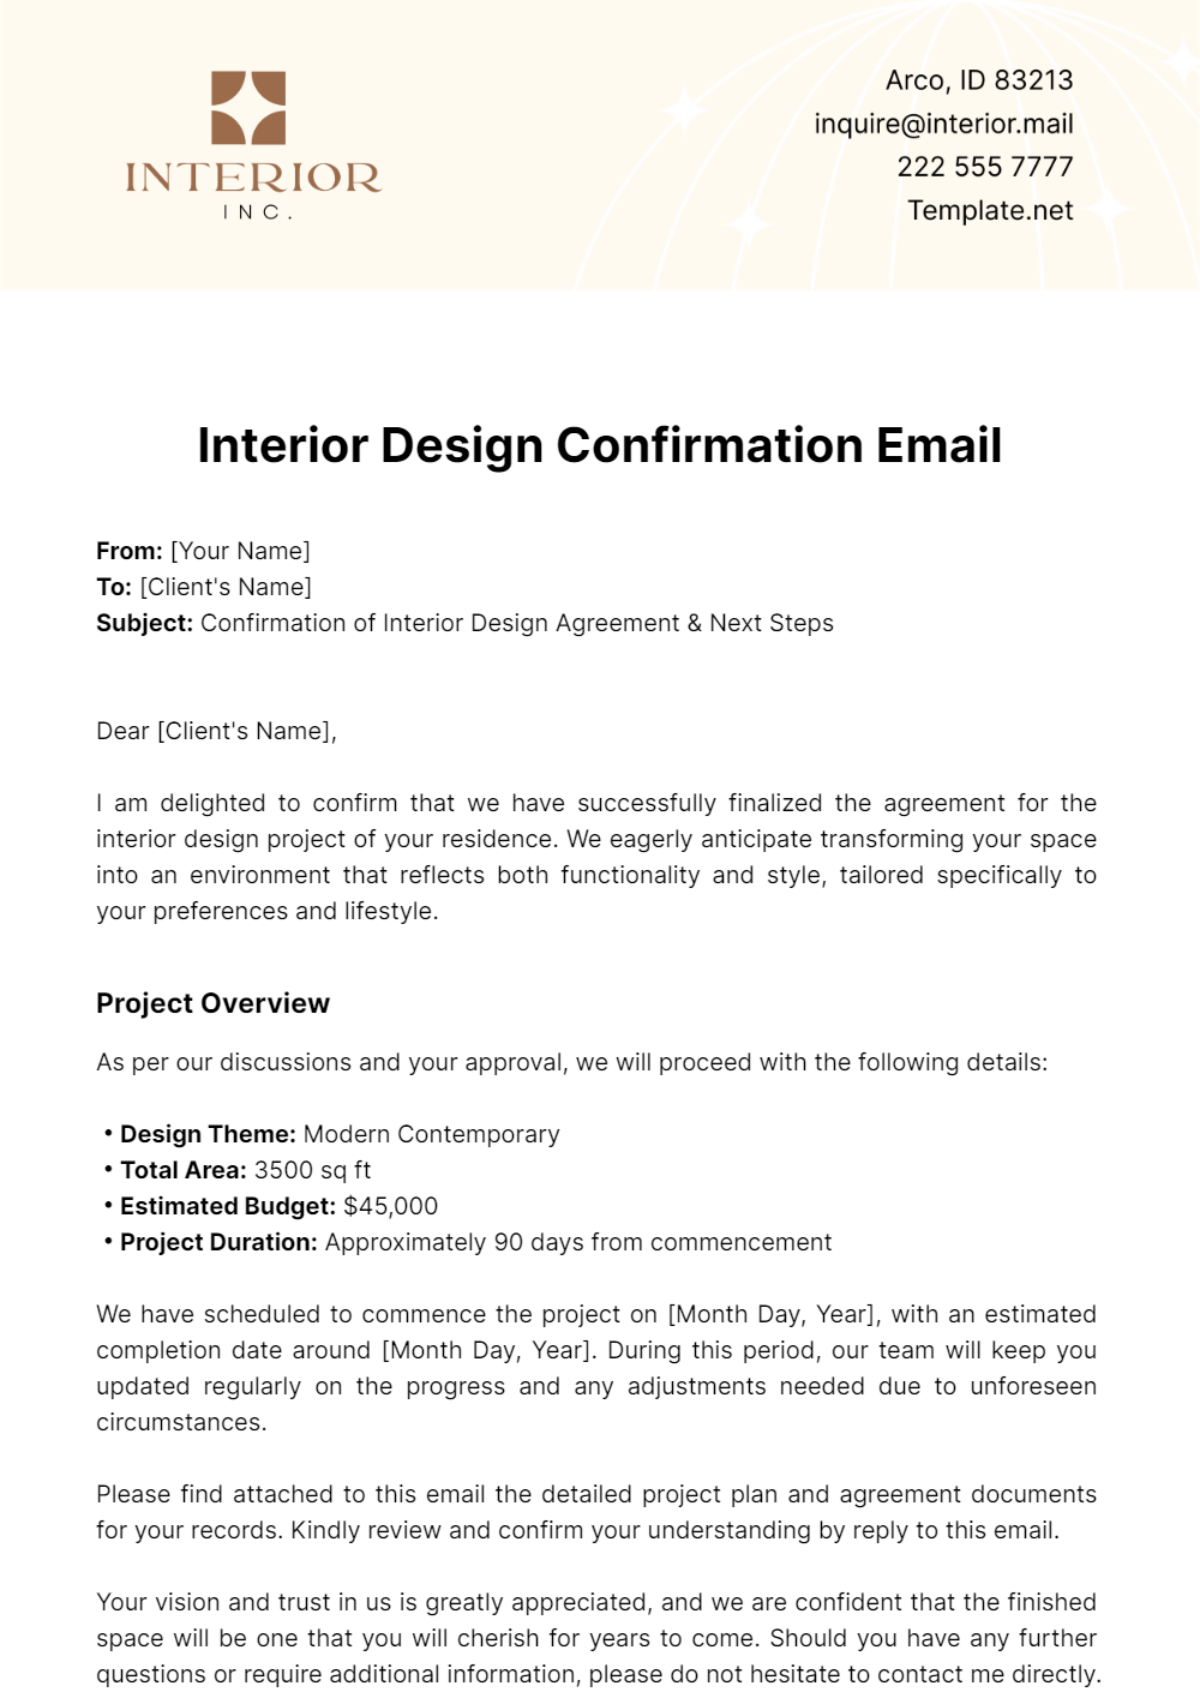 Free Interior Design Confirmation Email Template